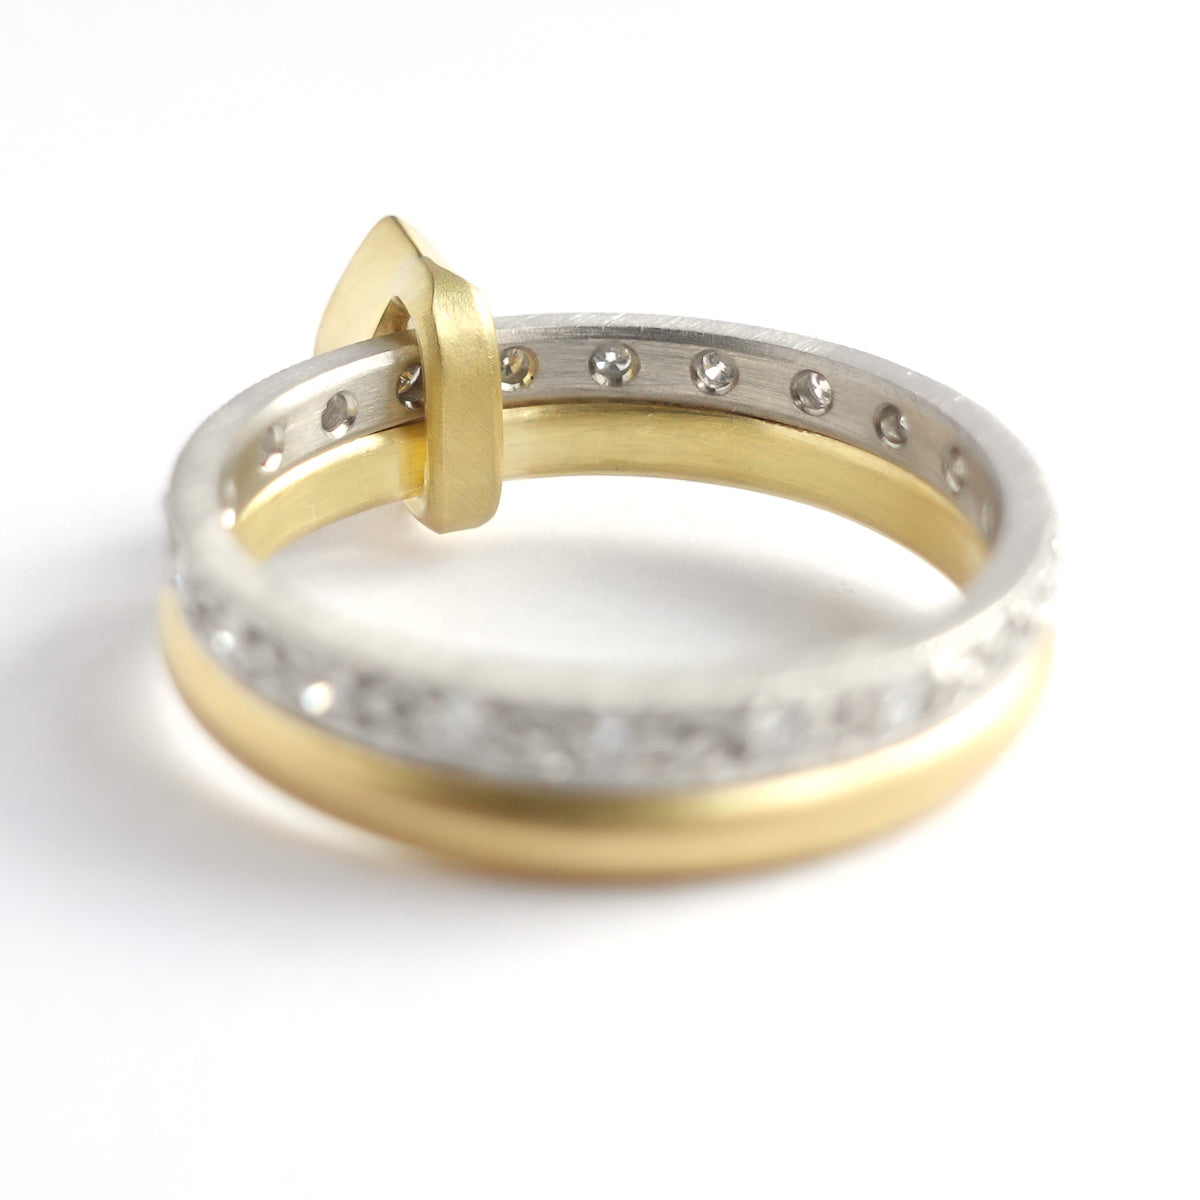 Platinum 18ct gold and marquise diamond ring, with pave set diamonds - contemporary.